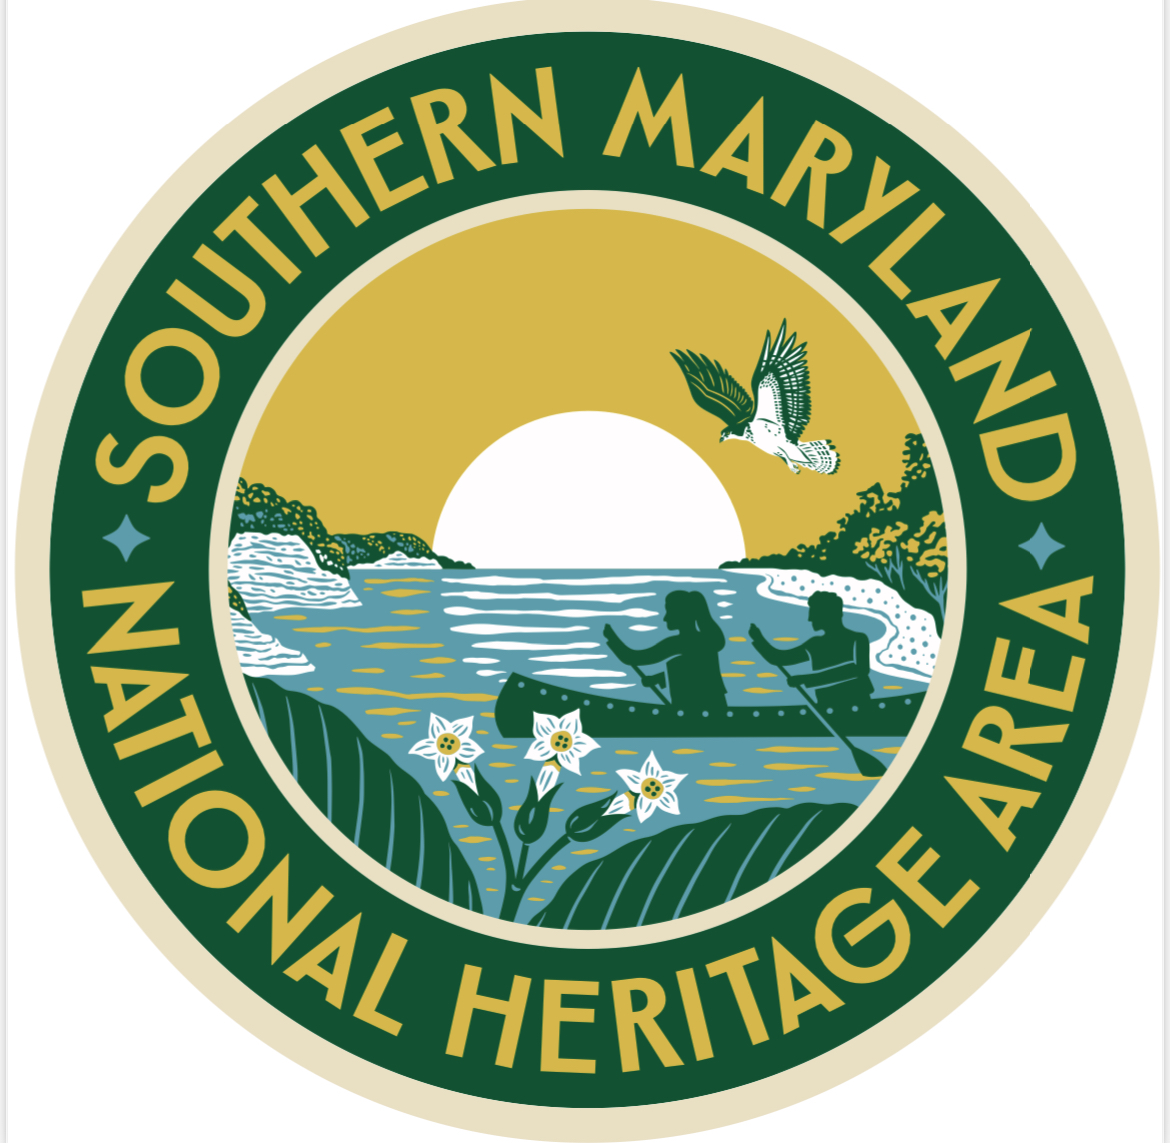 Southern Maryland National Heritage Area